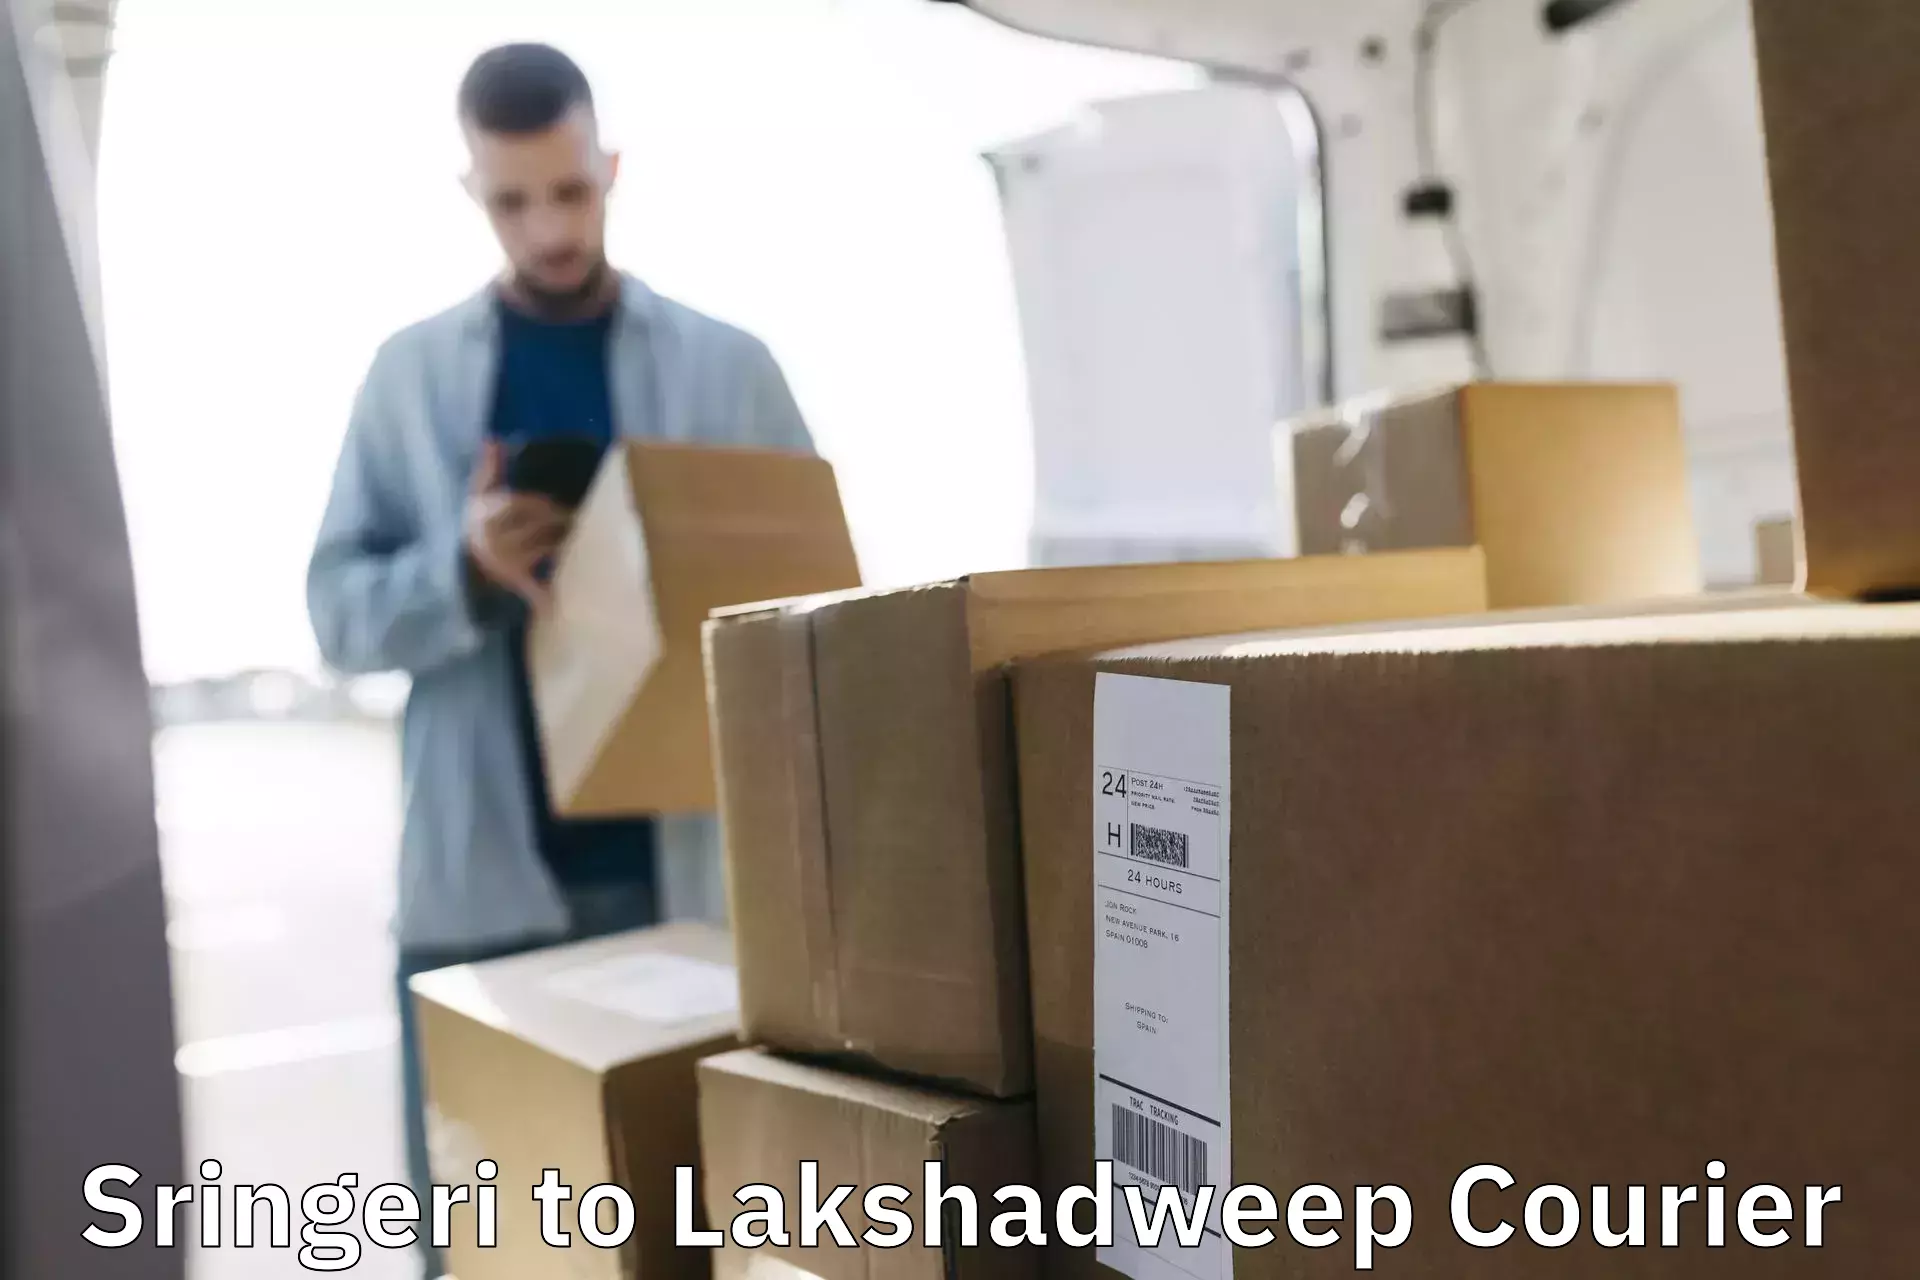 Multi-national courier services Sringeri to Lakshadweep